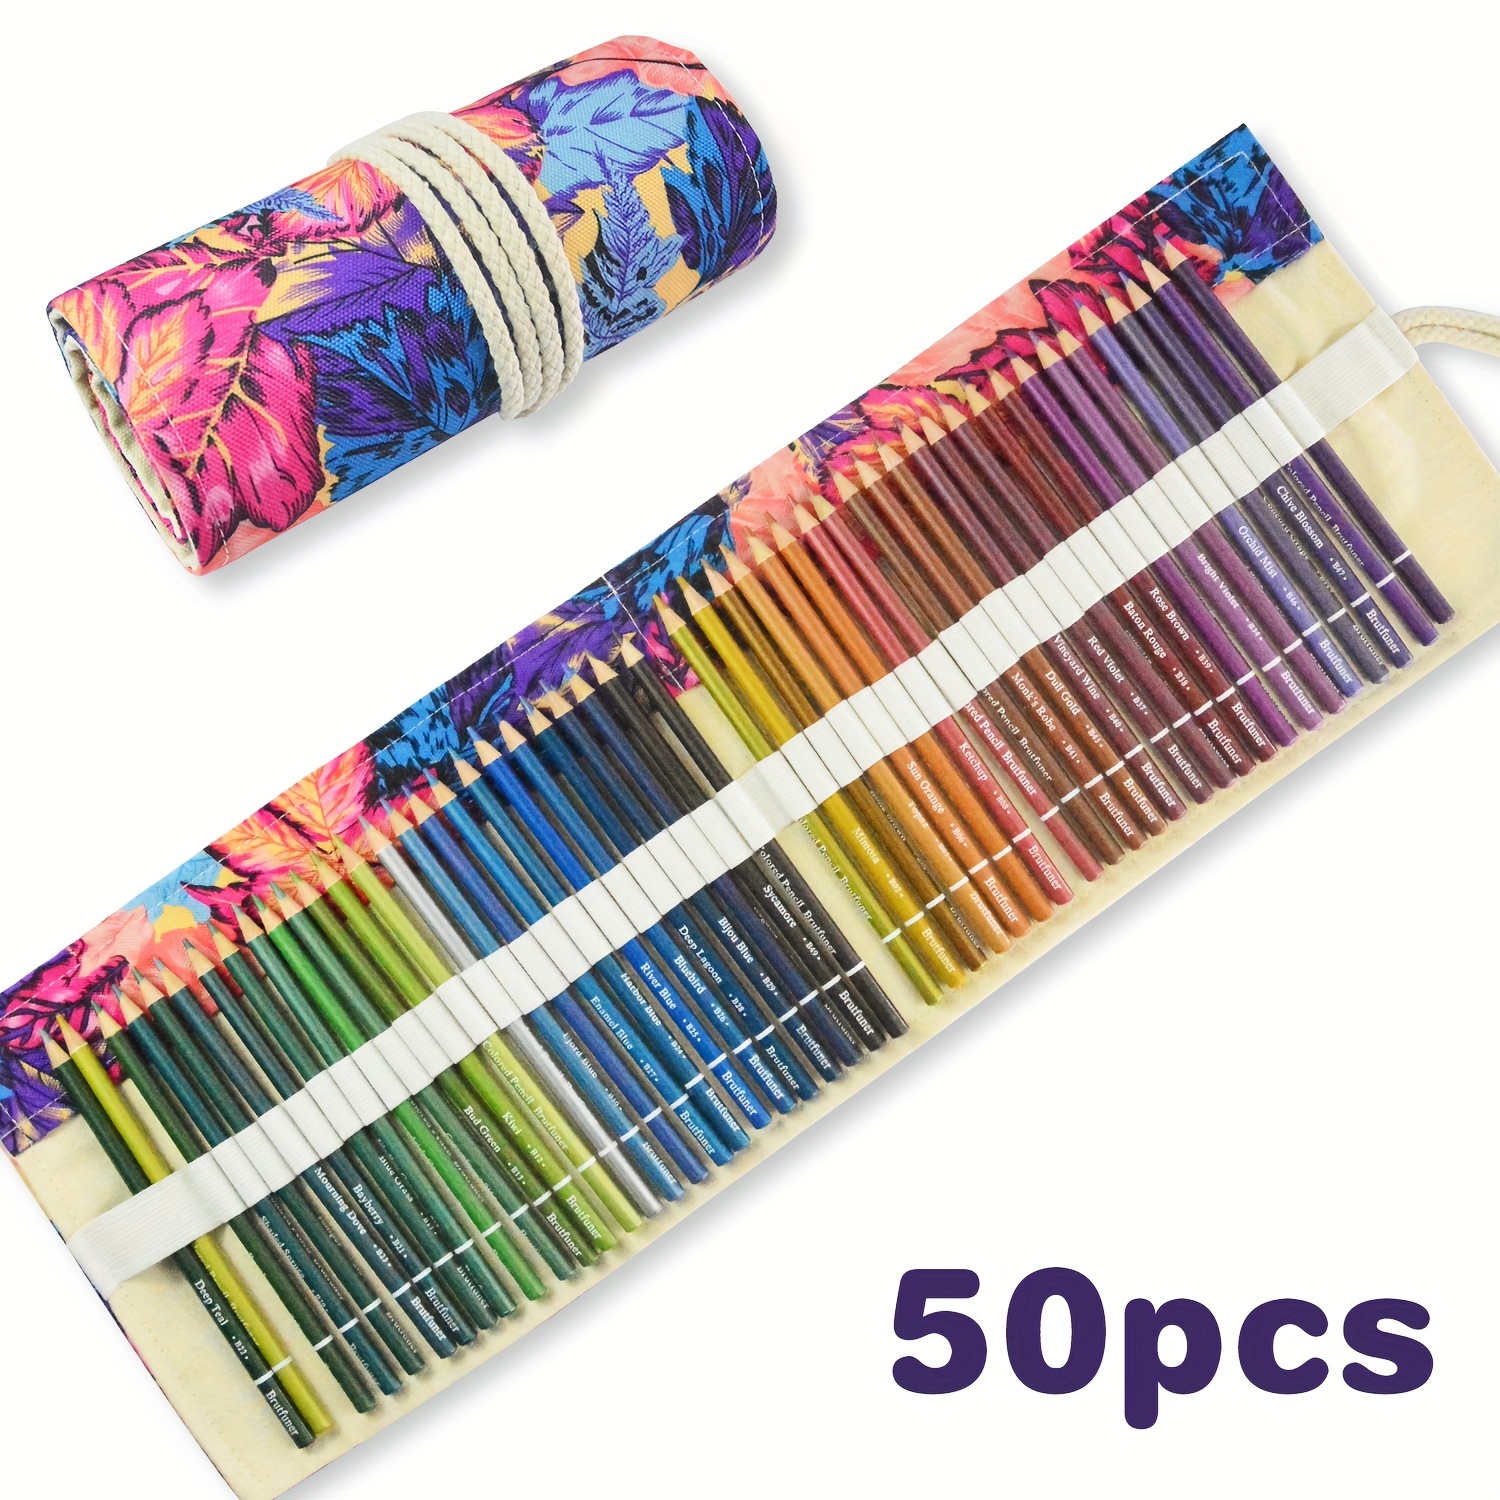 ThEast 48 Colored Pencils, Color Pencils for Adult Coloring Book, Artist Soft Core Oil Based Color Pencil Sets, Included Sharpener, Handmade Canvas